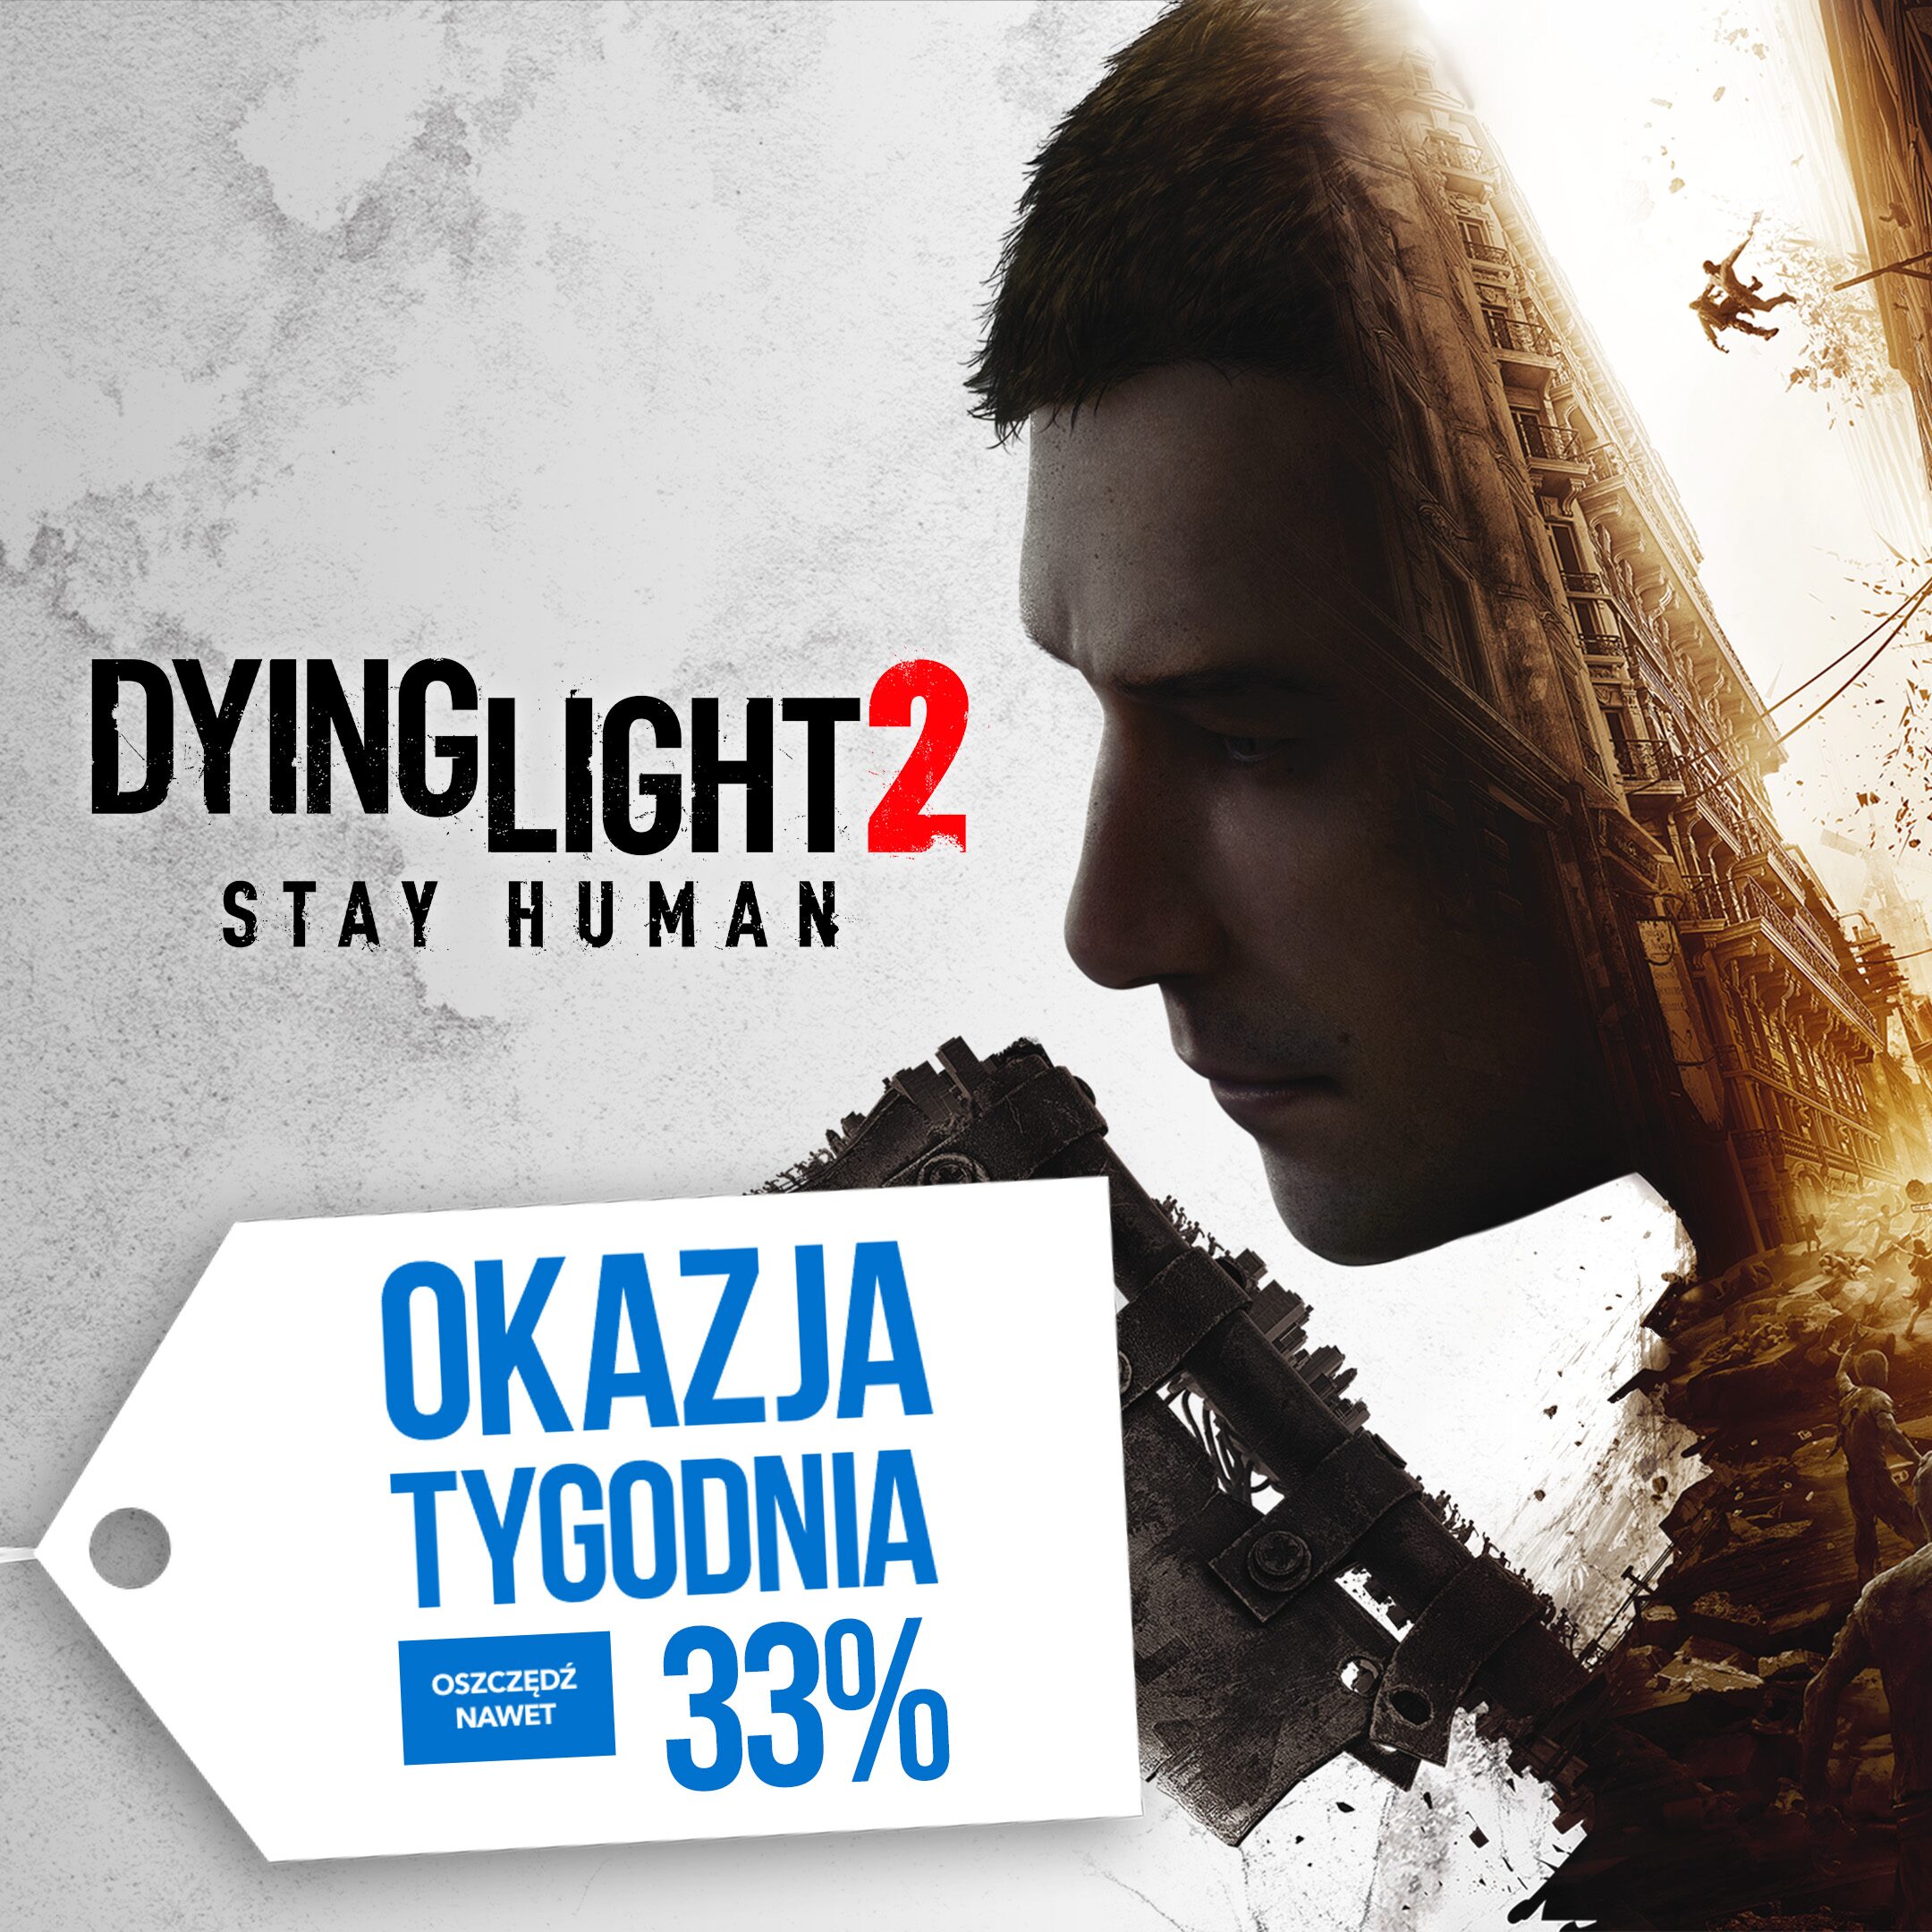 [PROMO] Deal of the Week - Dying Light 2